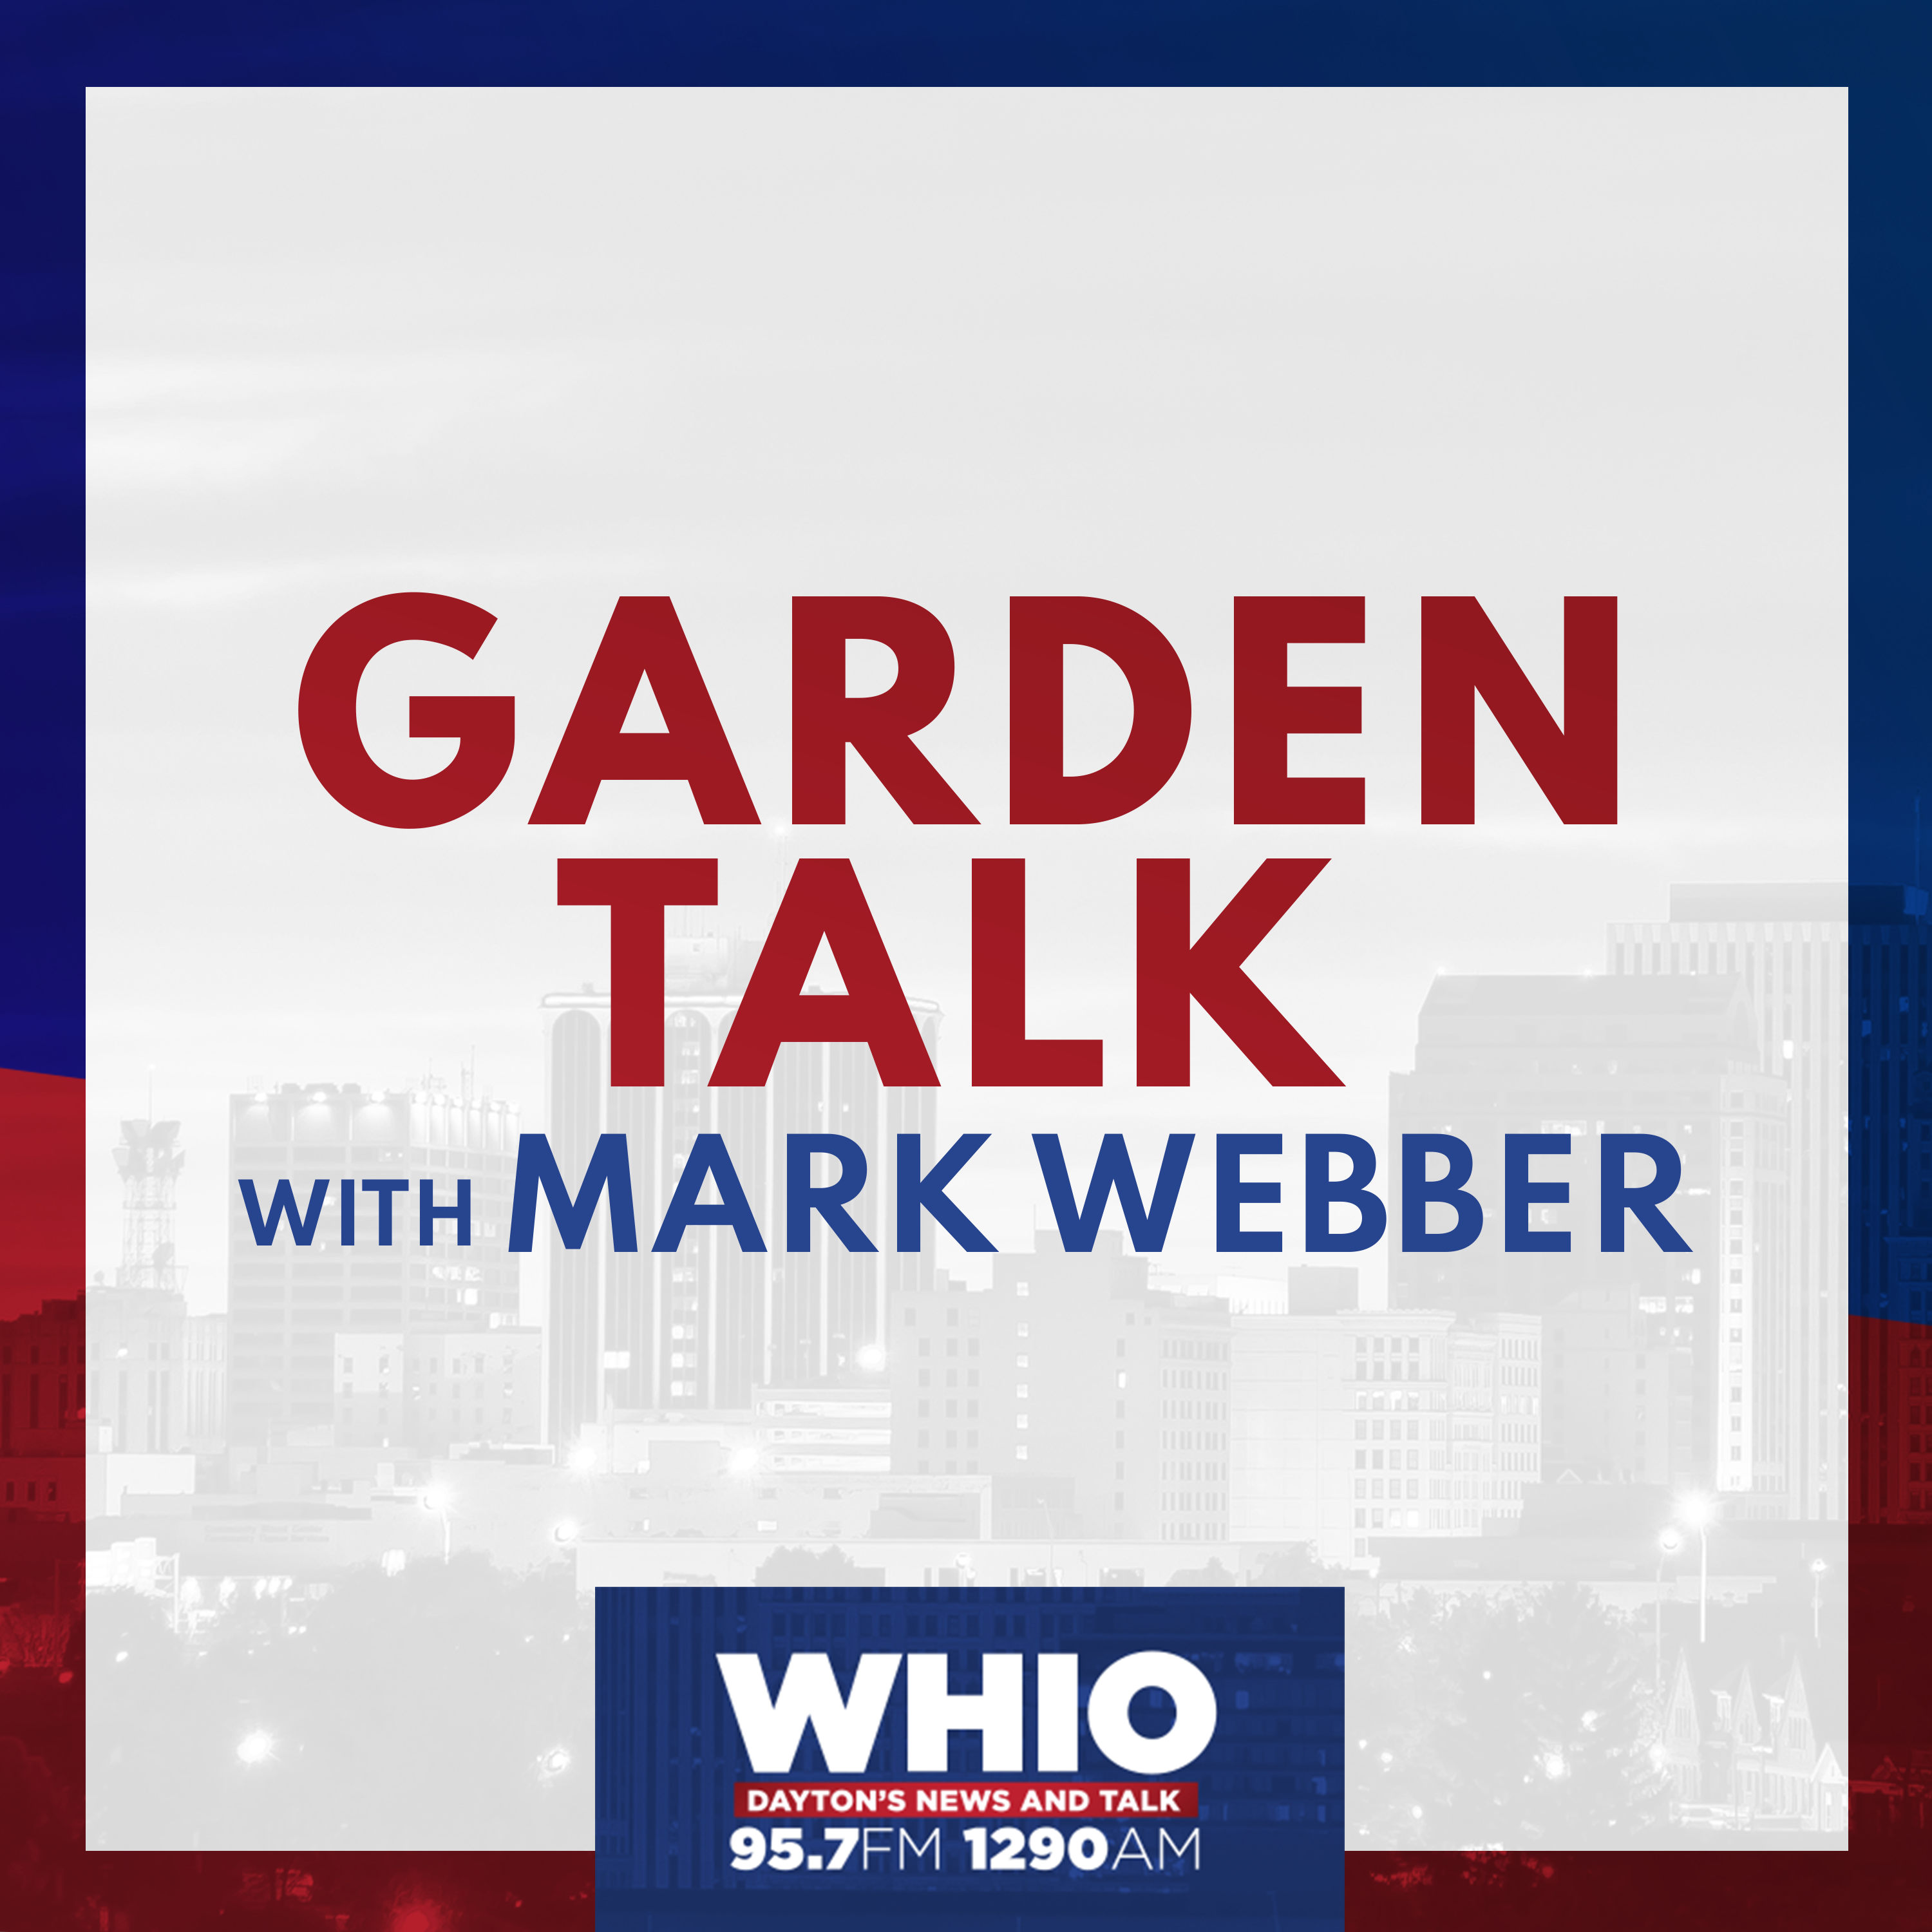 Garden Talk with Mark Webber: Hour 1 from Saturday, May 30th, 2015